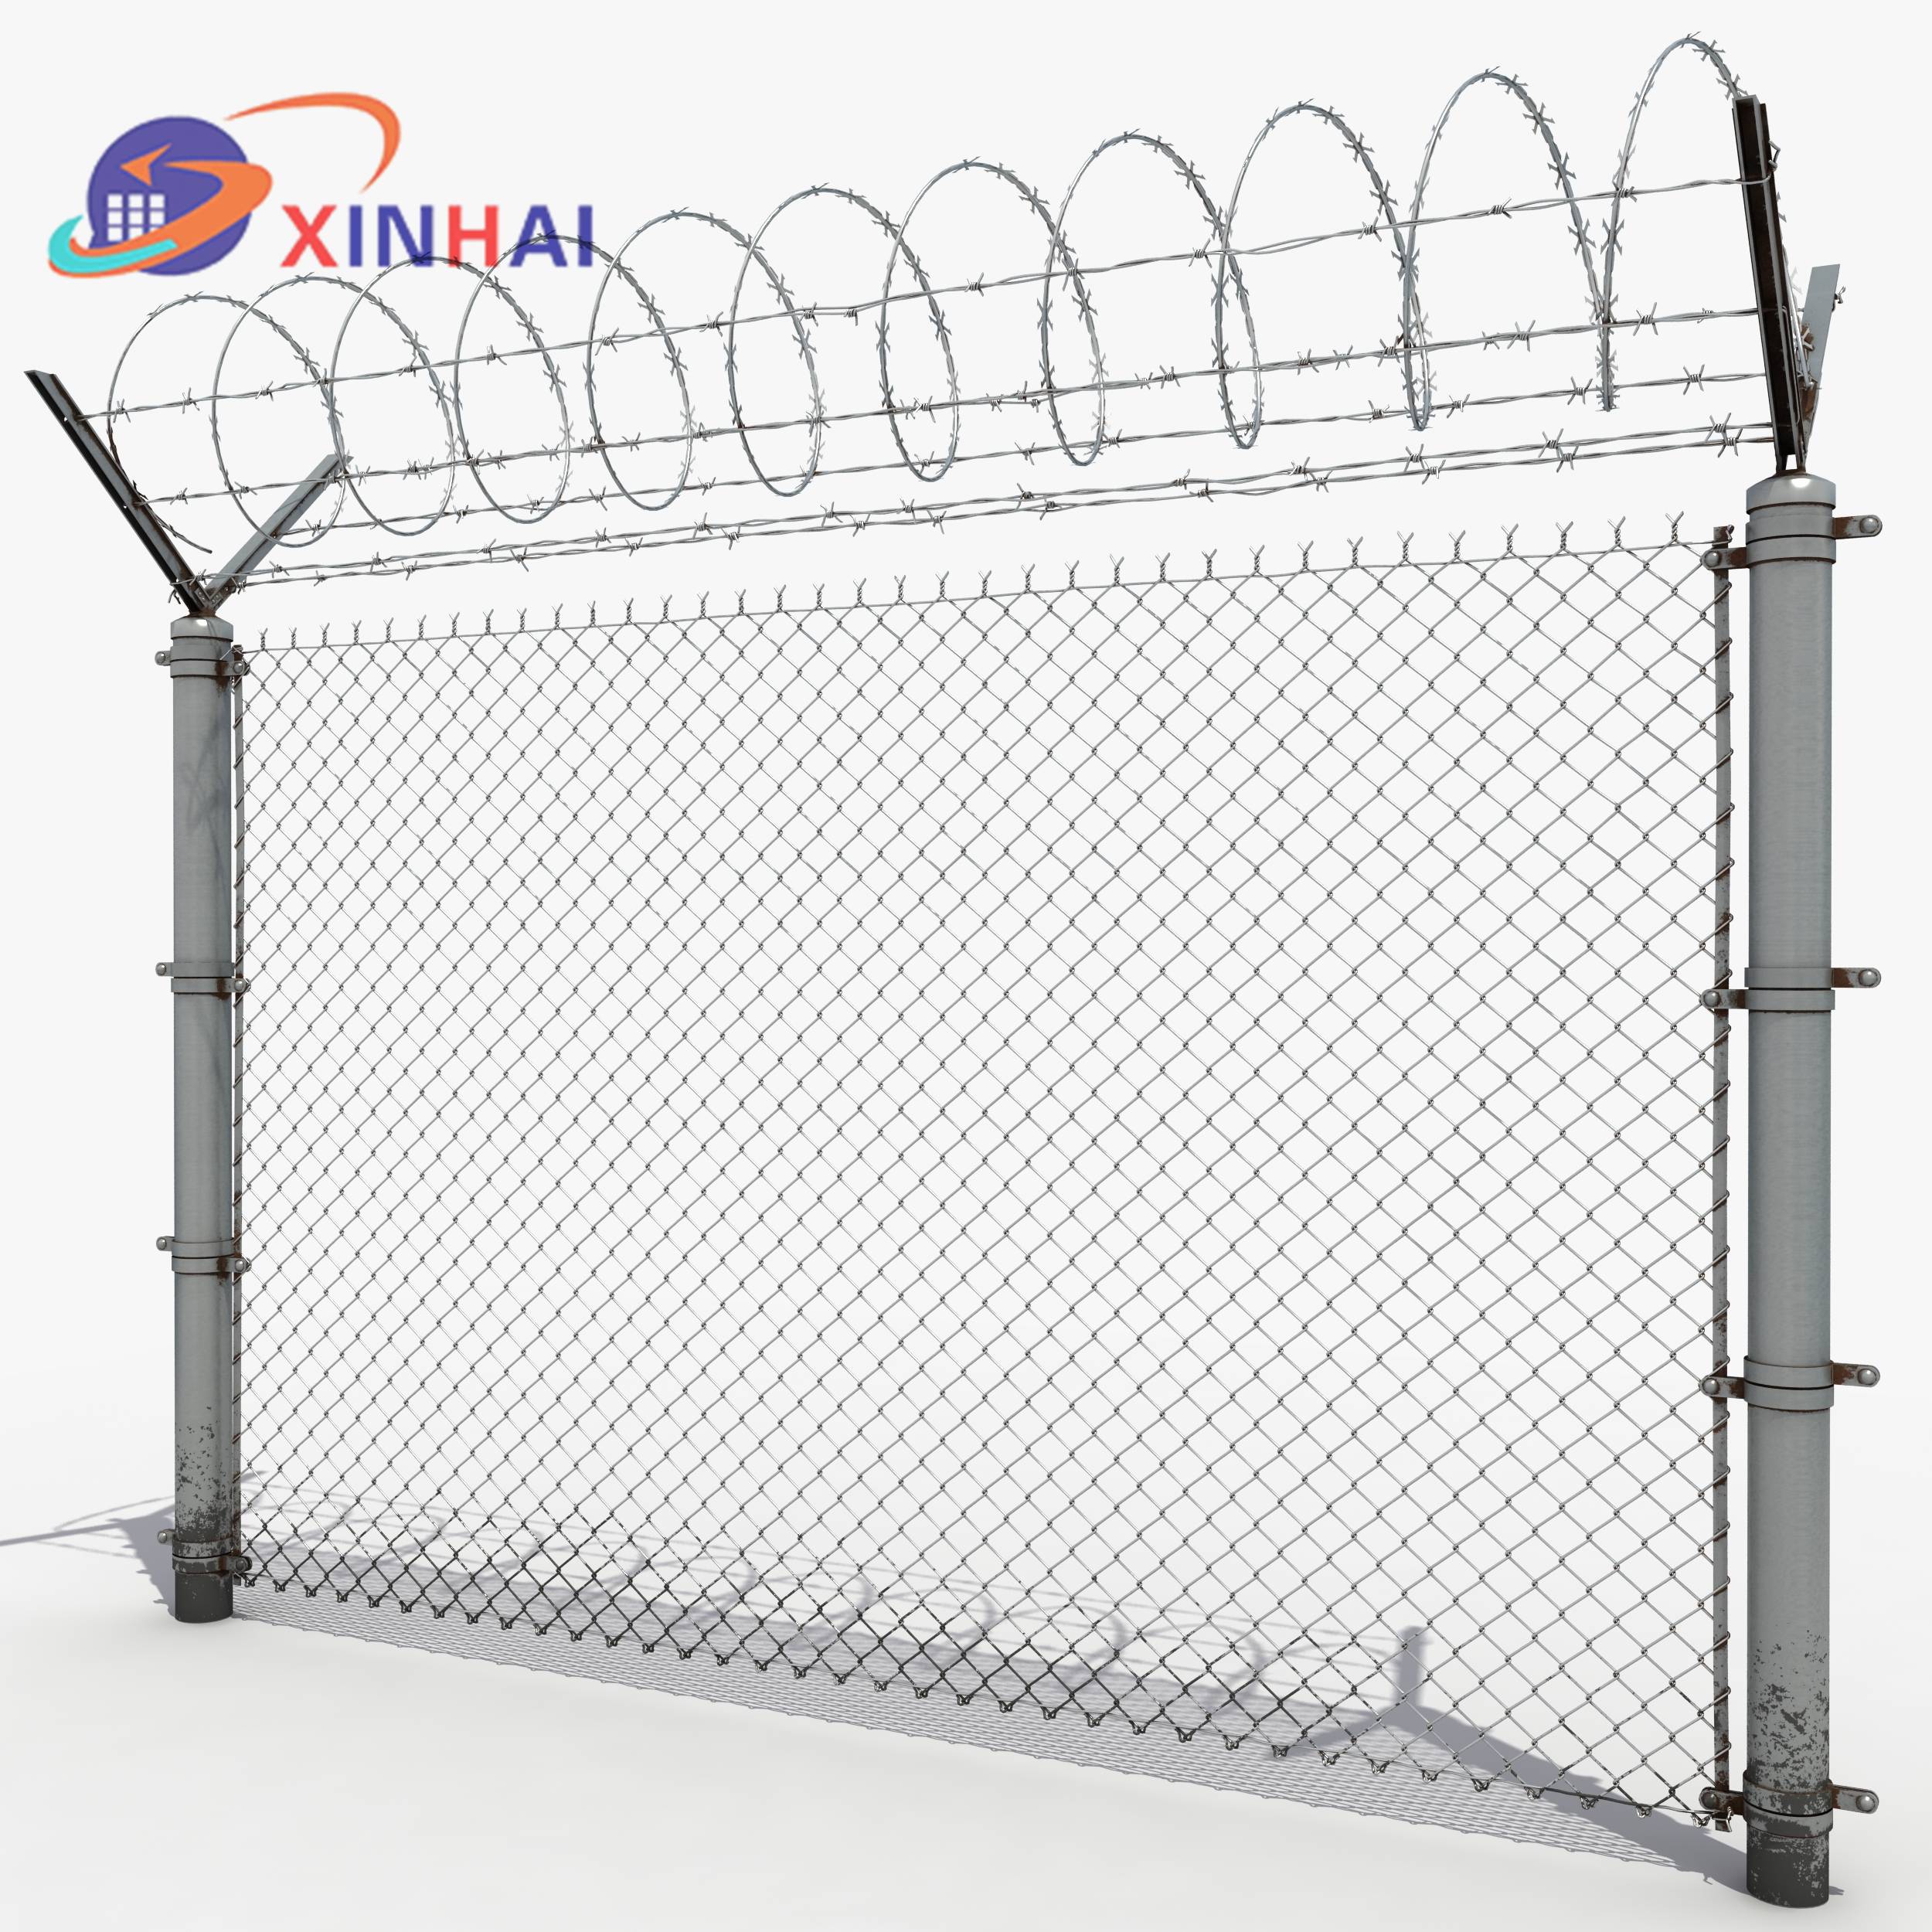 Top Suppliers 358 Steel Mesh Fence -
 Airport fence  – Xinhai